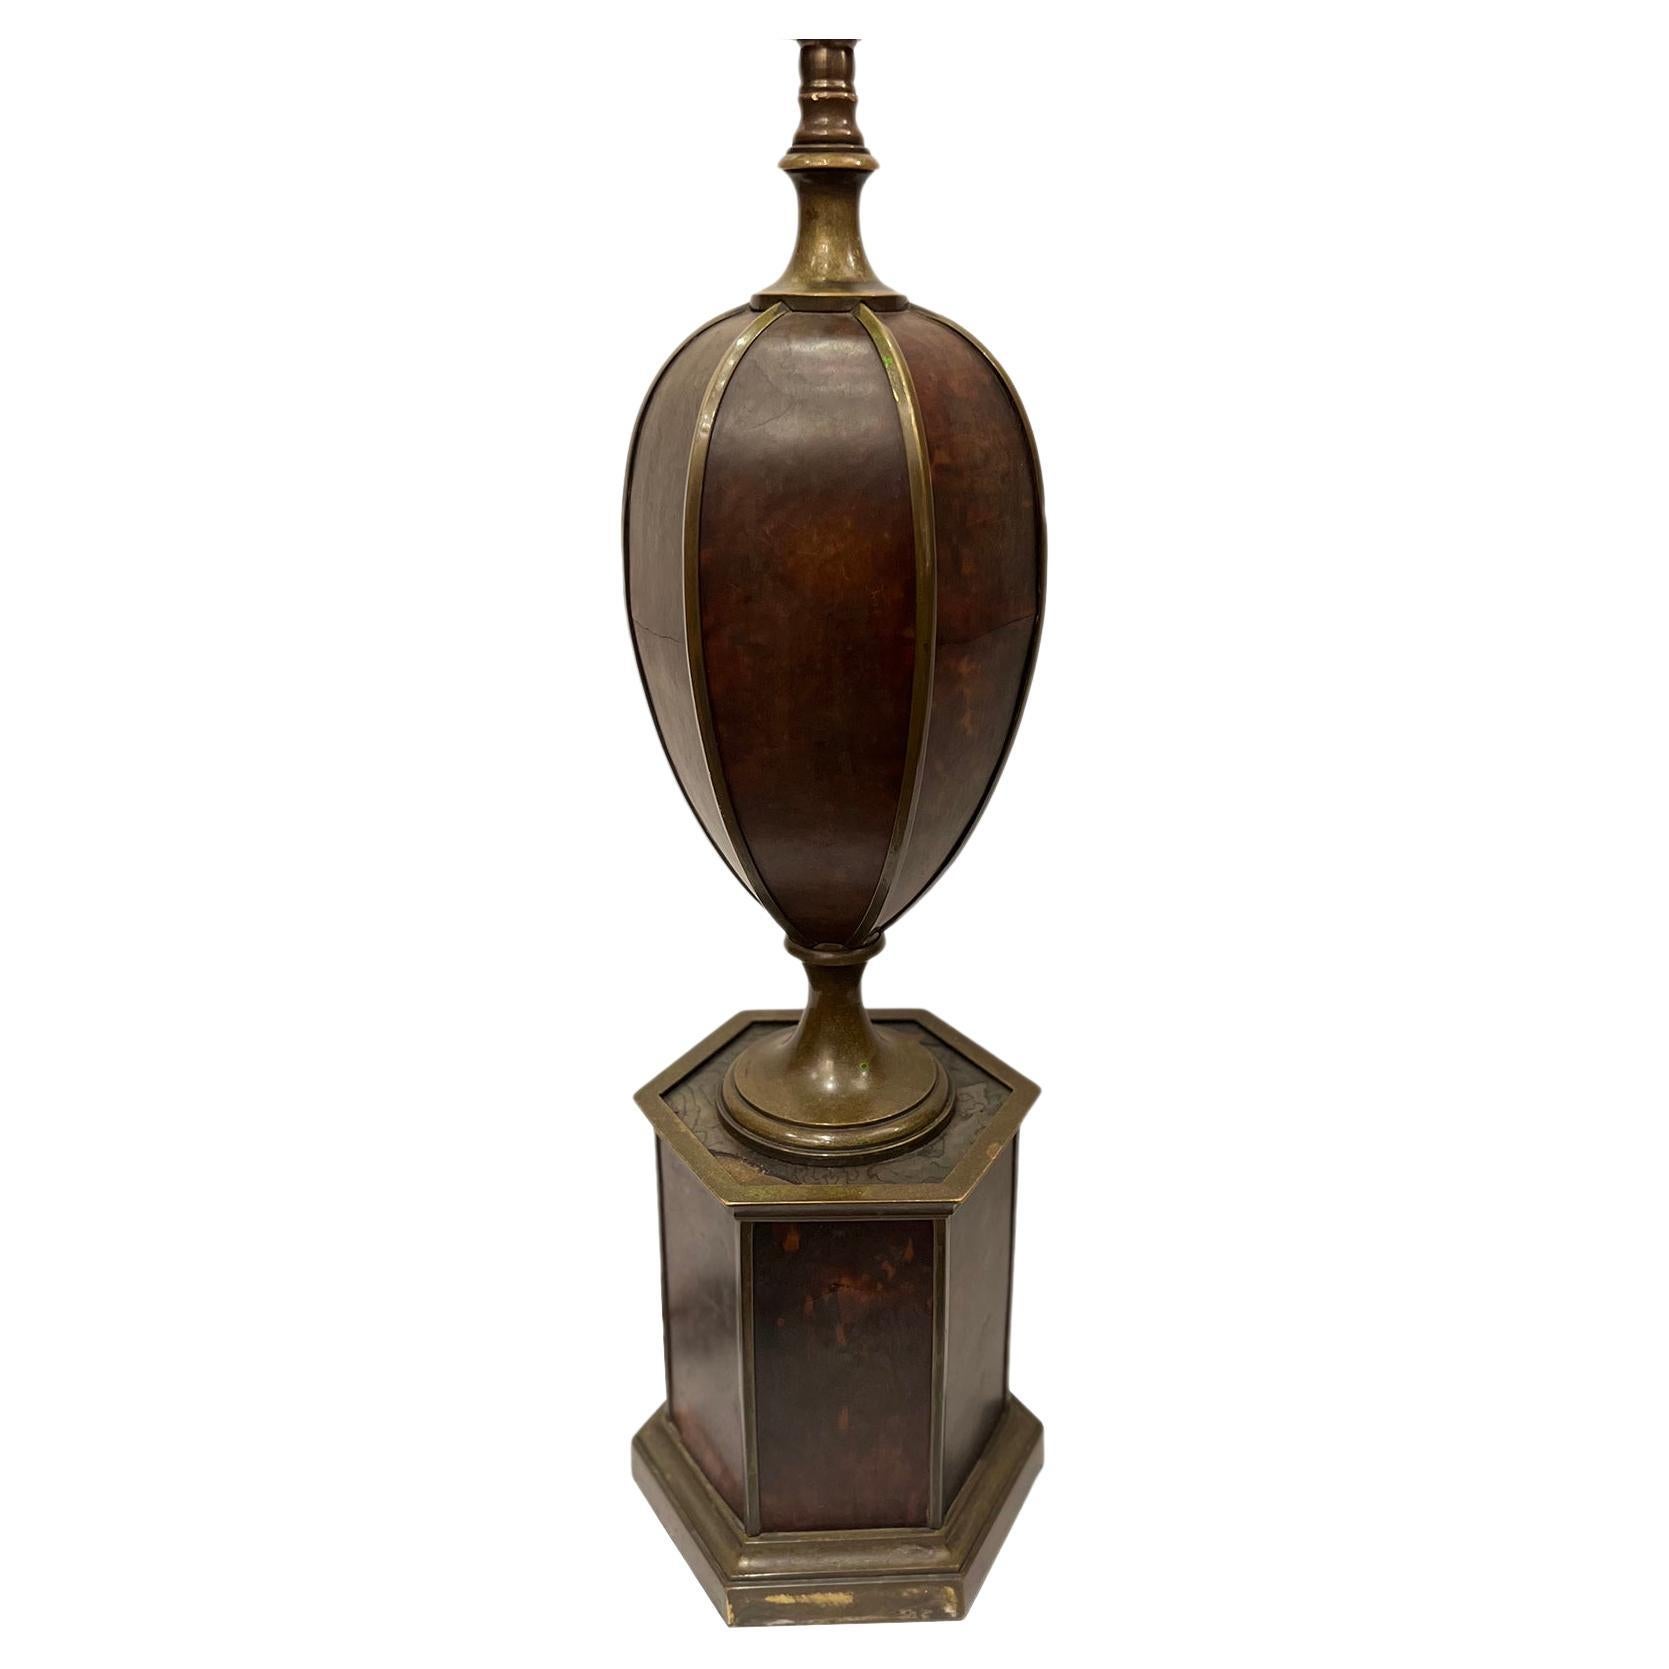 Antique French Table Lamp For Sale